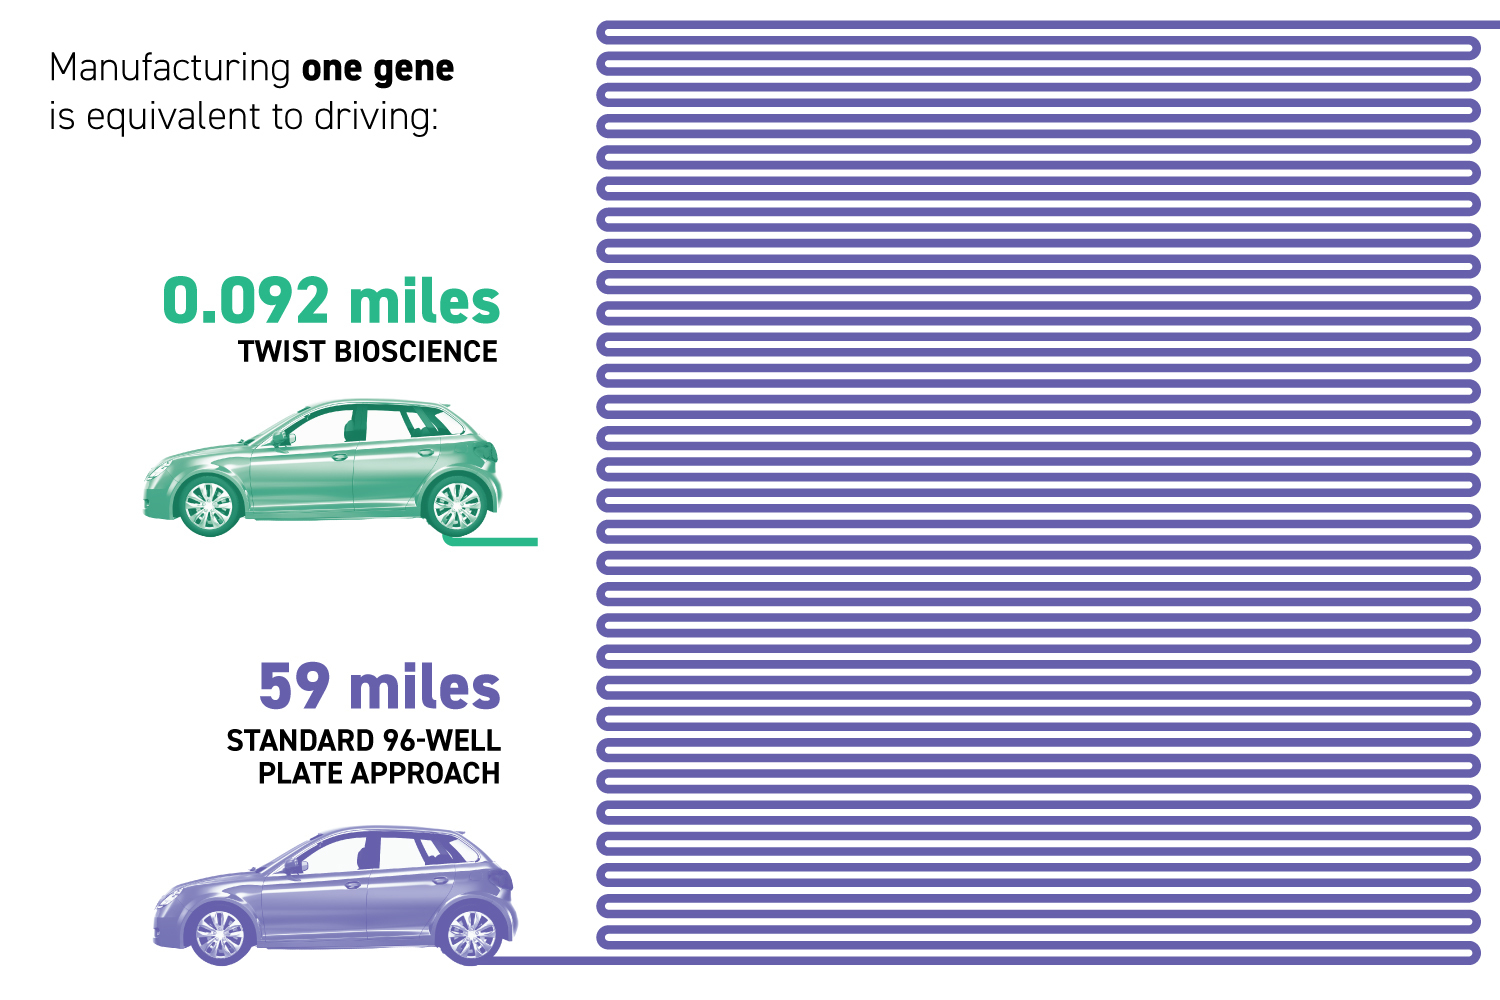 Infographic showing milage difference between technologies with a green car (representing Twist) and purple car. Text reads: Manufacturing one gene is equivalent to driving: 0.092 miles with Twist Bioscience; 59 miles with standard 96-well plate approach.